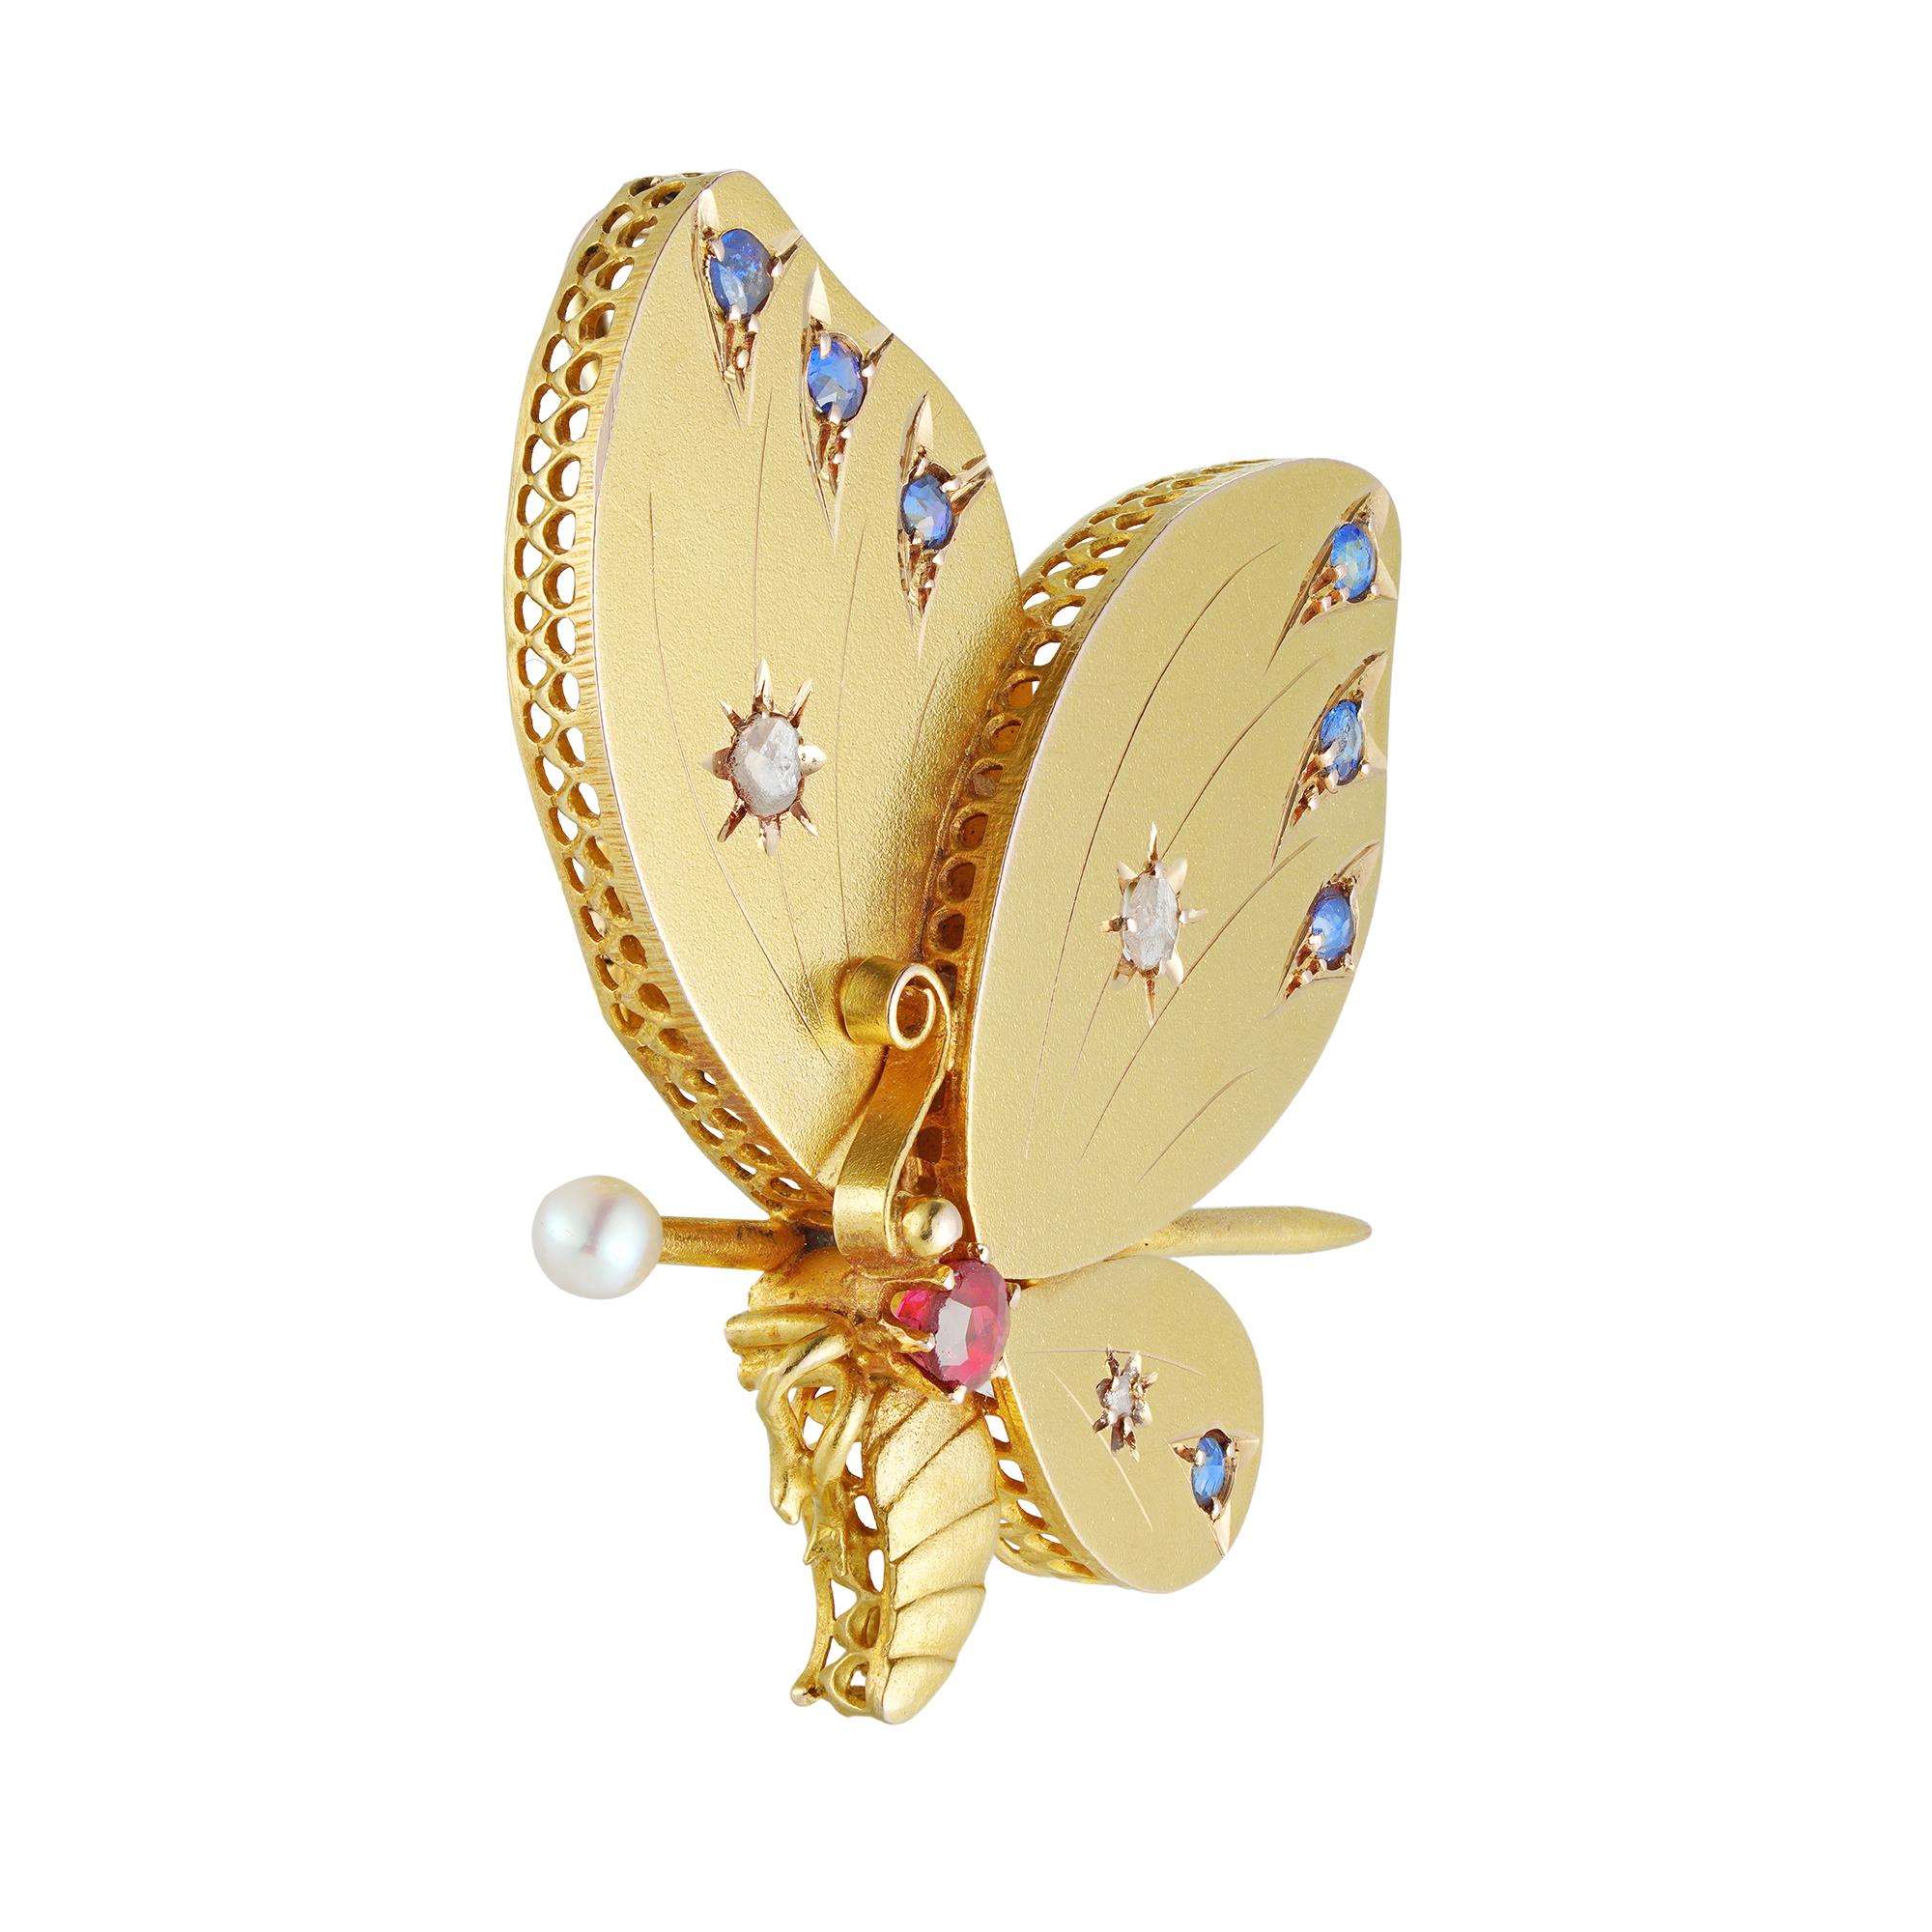 A turn-of-the-century gold butterfly brooch/pendant, the thorax set with a round faceted ruby, the wings embellished with three rose-cut diamonds and seven faceted sapphires, all mounted in yellow gold, with a gold pin set with a pearl, at the back